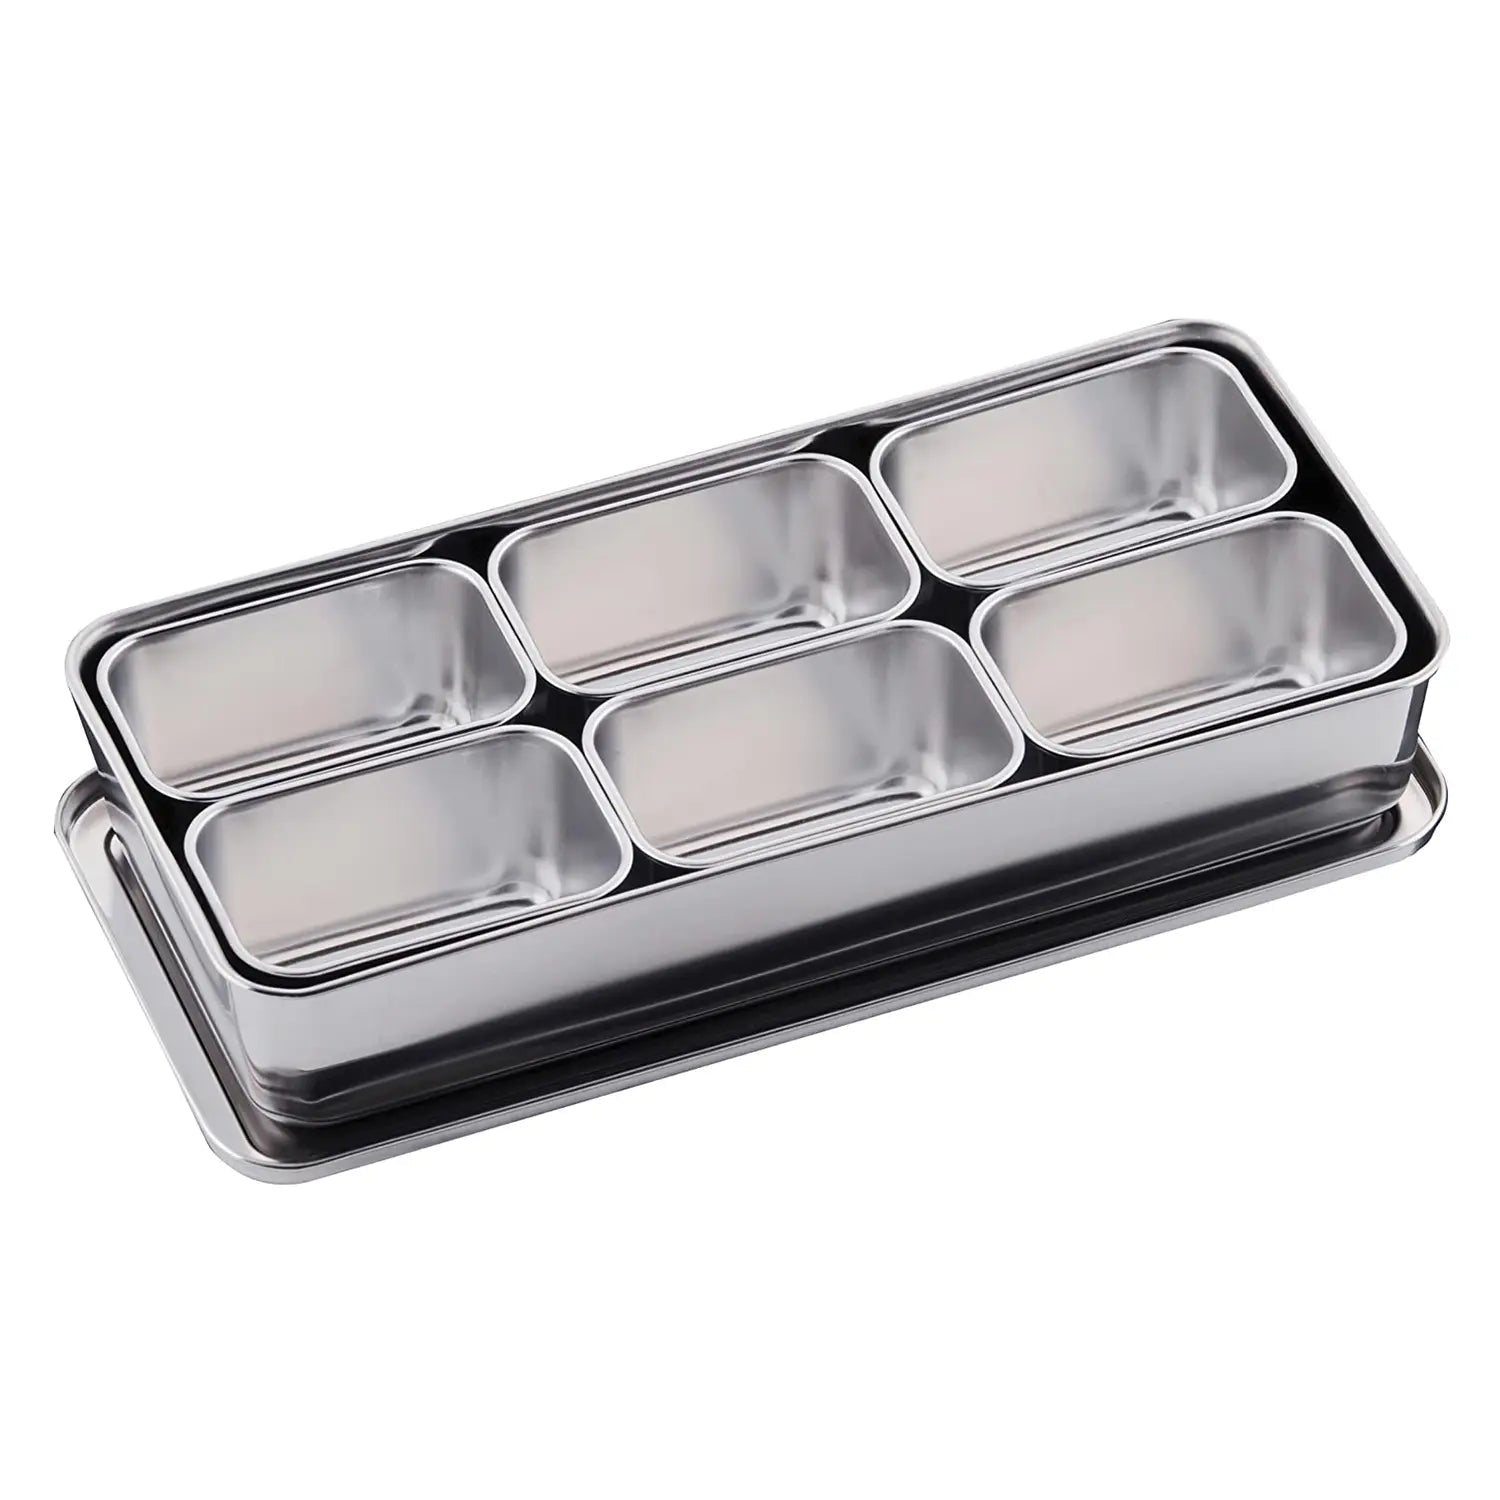 Premium 6-Compartment Stainless Steel Yakumi Seasoning Container by Clover